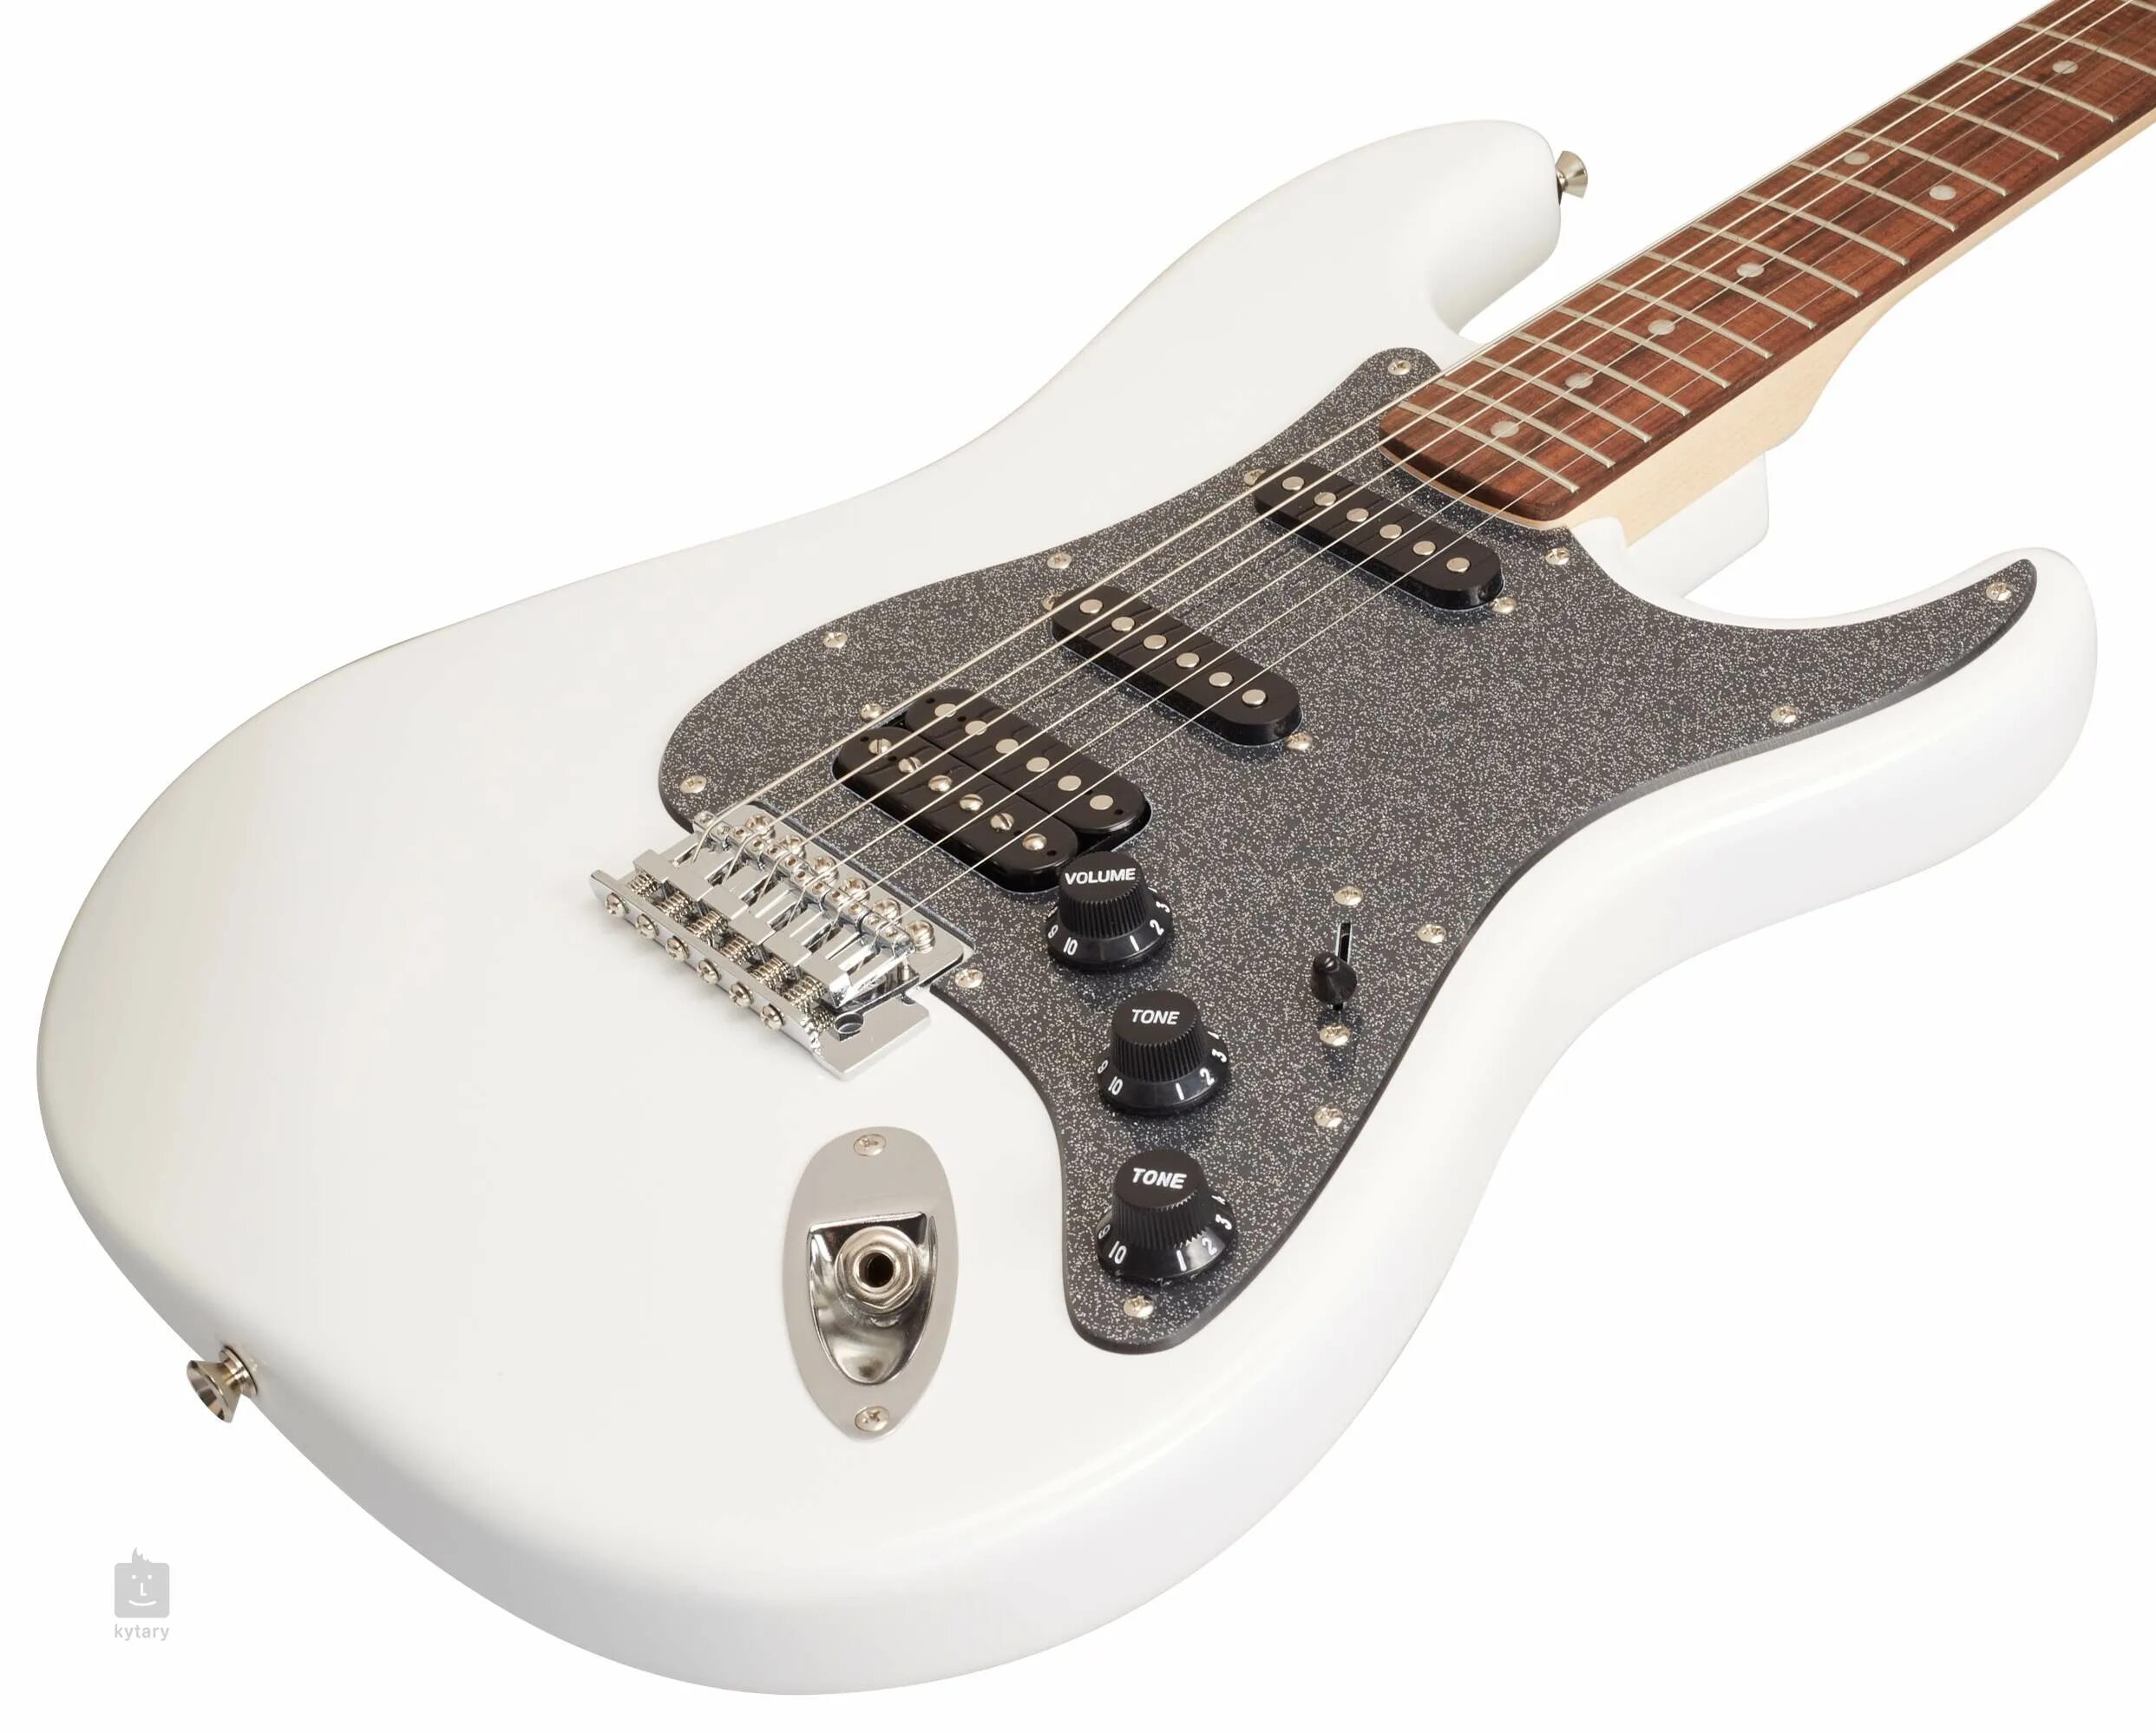 Squier Affinity HSS. Stratocaster Affinity HSS. Stratocaster Affinity Olympic White. Электрогитара Squier Affinity fat Stratocaster.